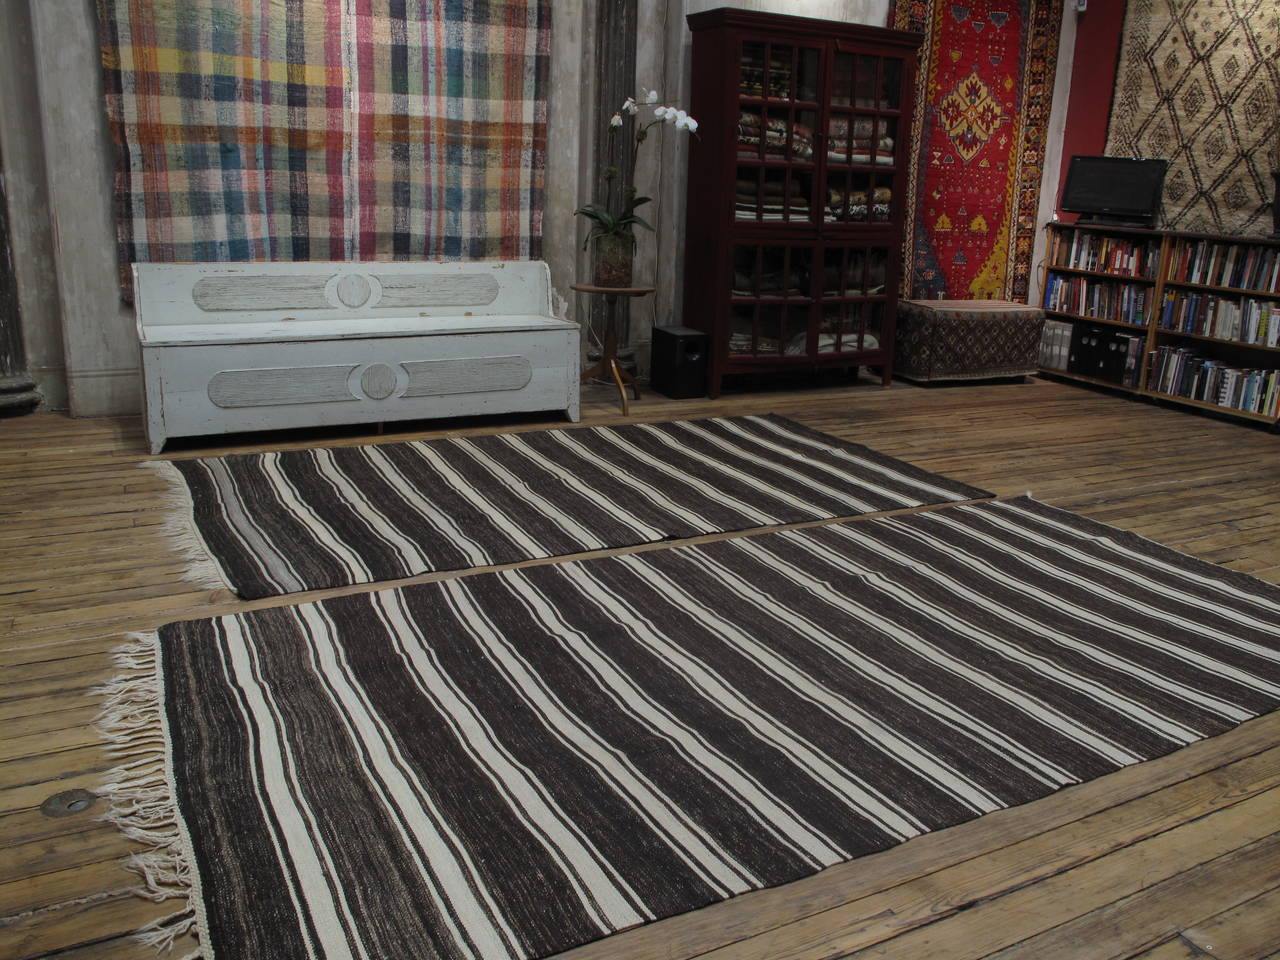 A pair of simple old tribal floor covers from Central Turkey, woven with natural dark brown and ivory wool and goat hair (no dyes). These are very sturdy weavings, suitable even for high traffic. They can be placed side-by-side, or easily stitched